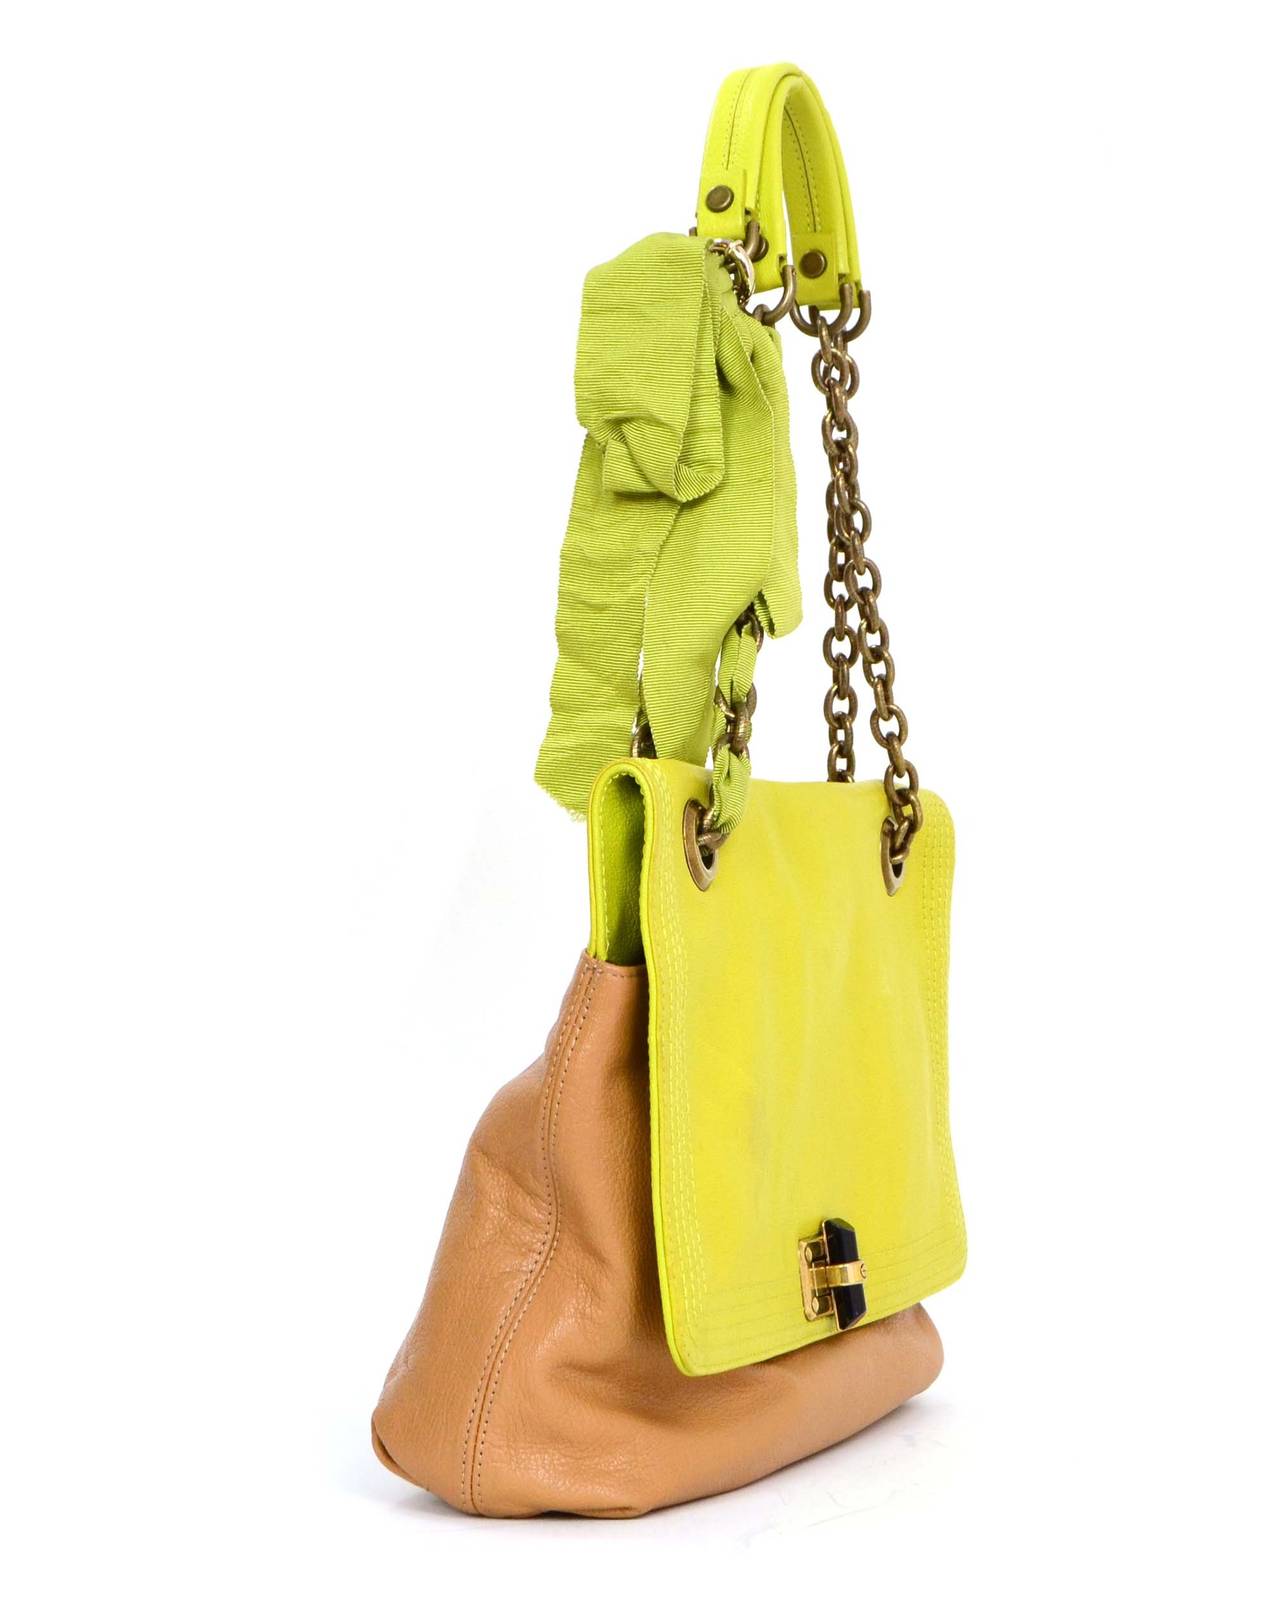 Lanvin Two-Tone Leather Happy Bag
Features green ribbon interwoven through brass chain link shoulder strap
Made in: Italy
Color: Lime green and tan
Hardware: Brass
Materials: Leather, metal and grosgrain
Lining: Black Lanvin logo printed